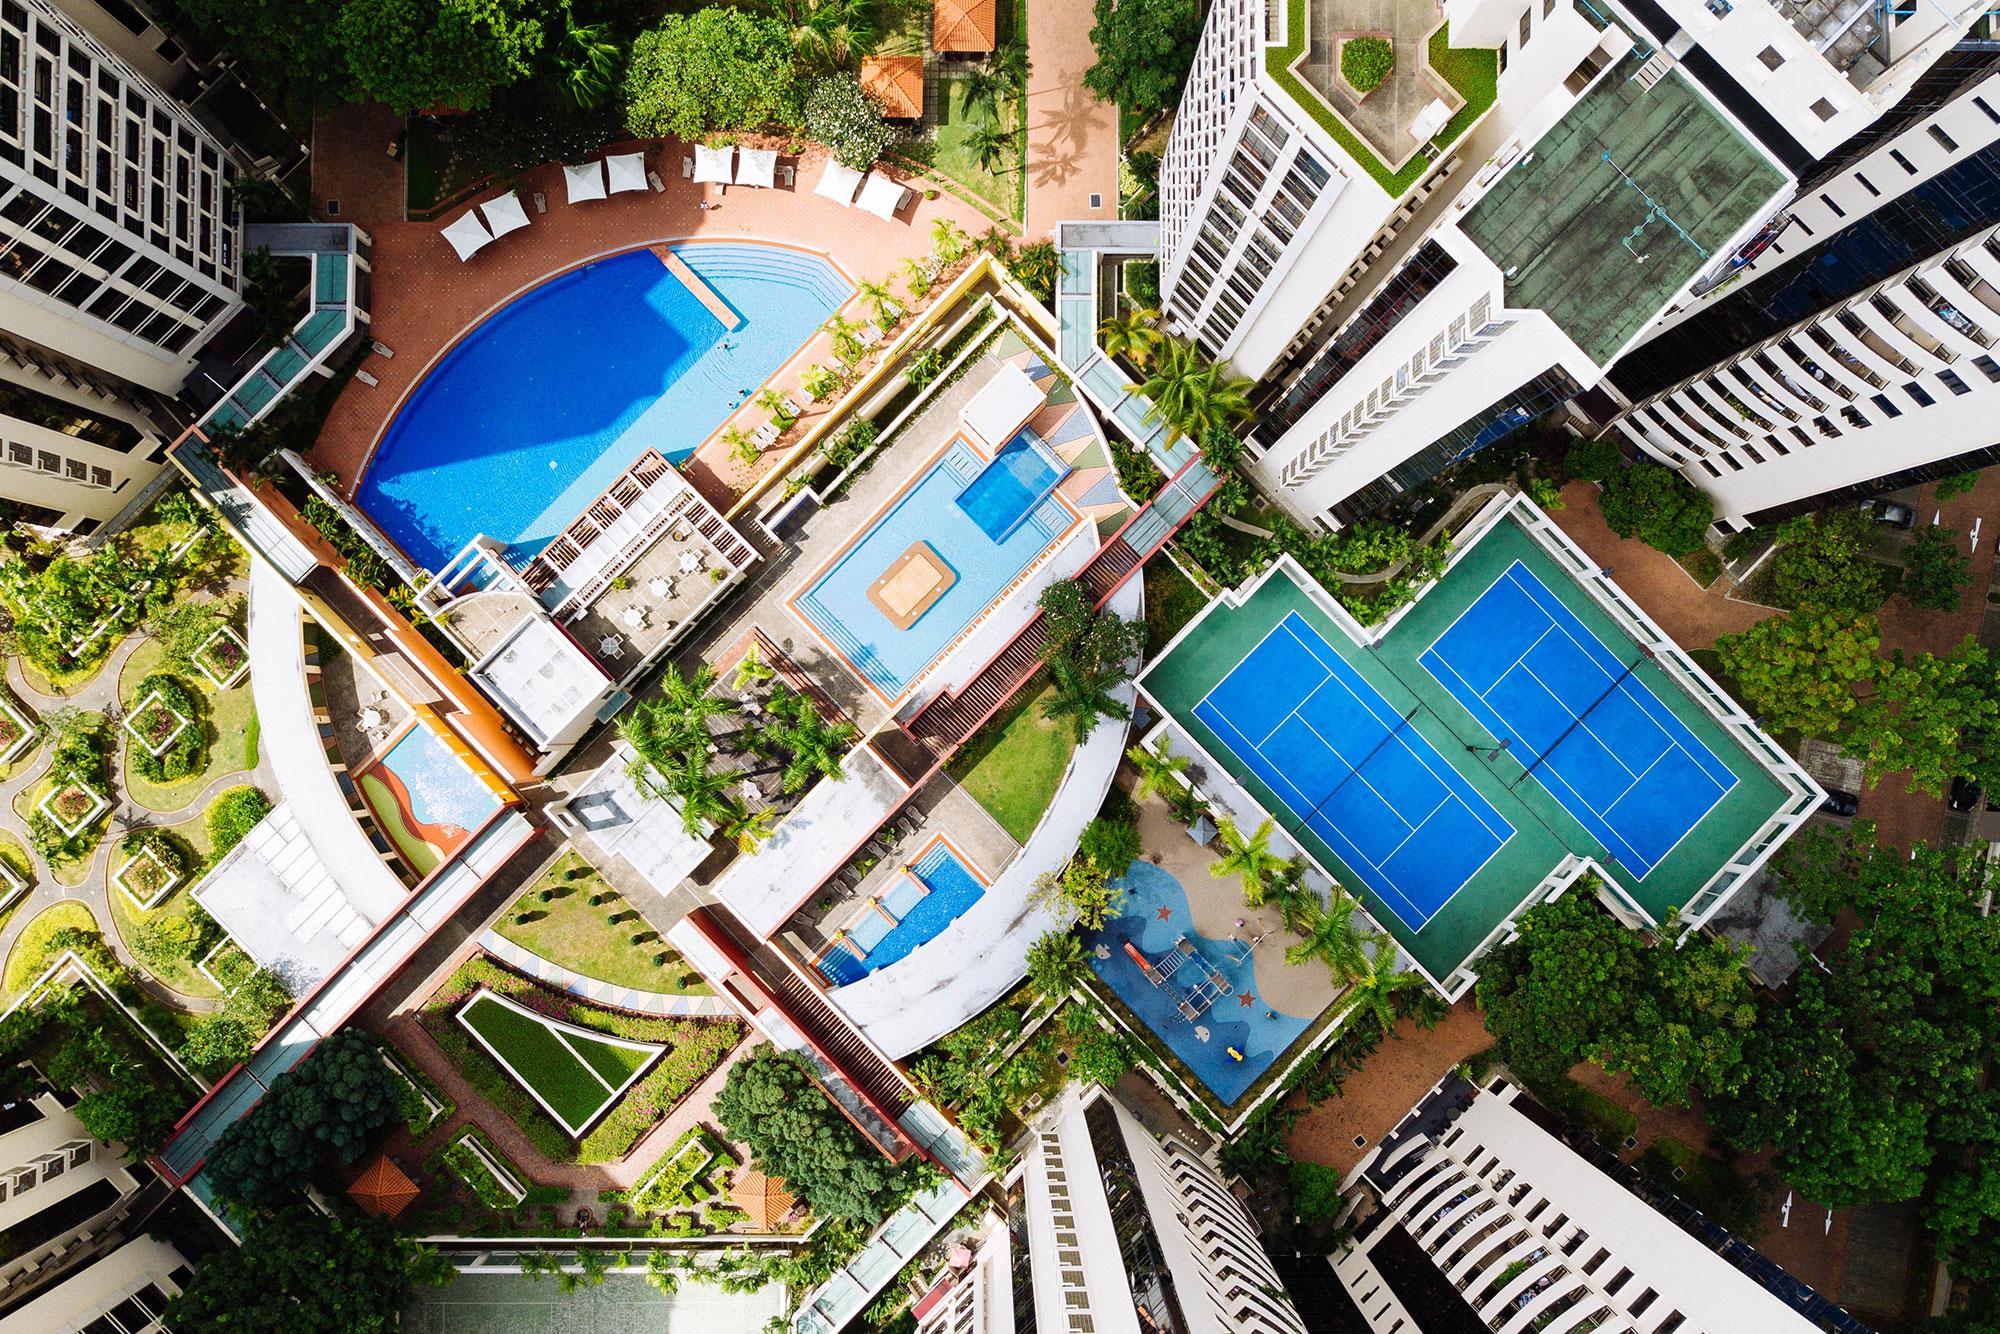 Sky view of pools and tennis courts at a multifamily complex